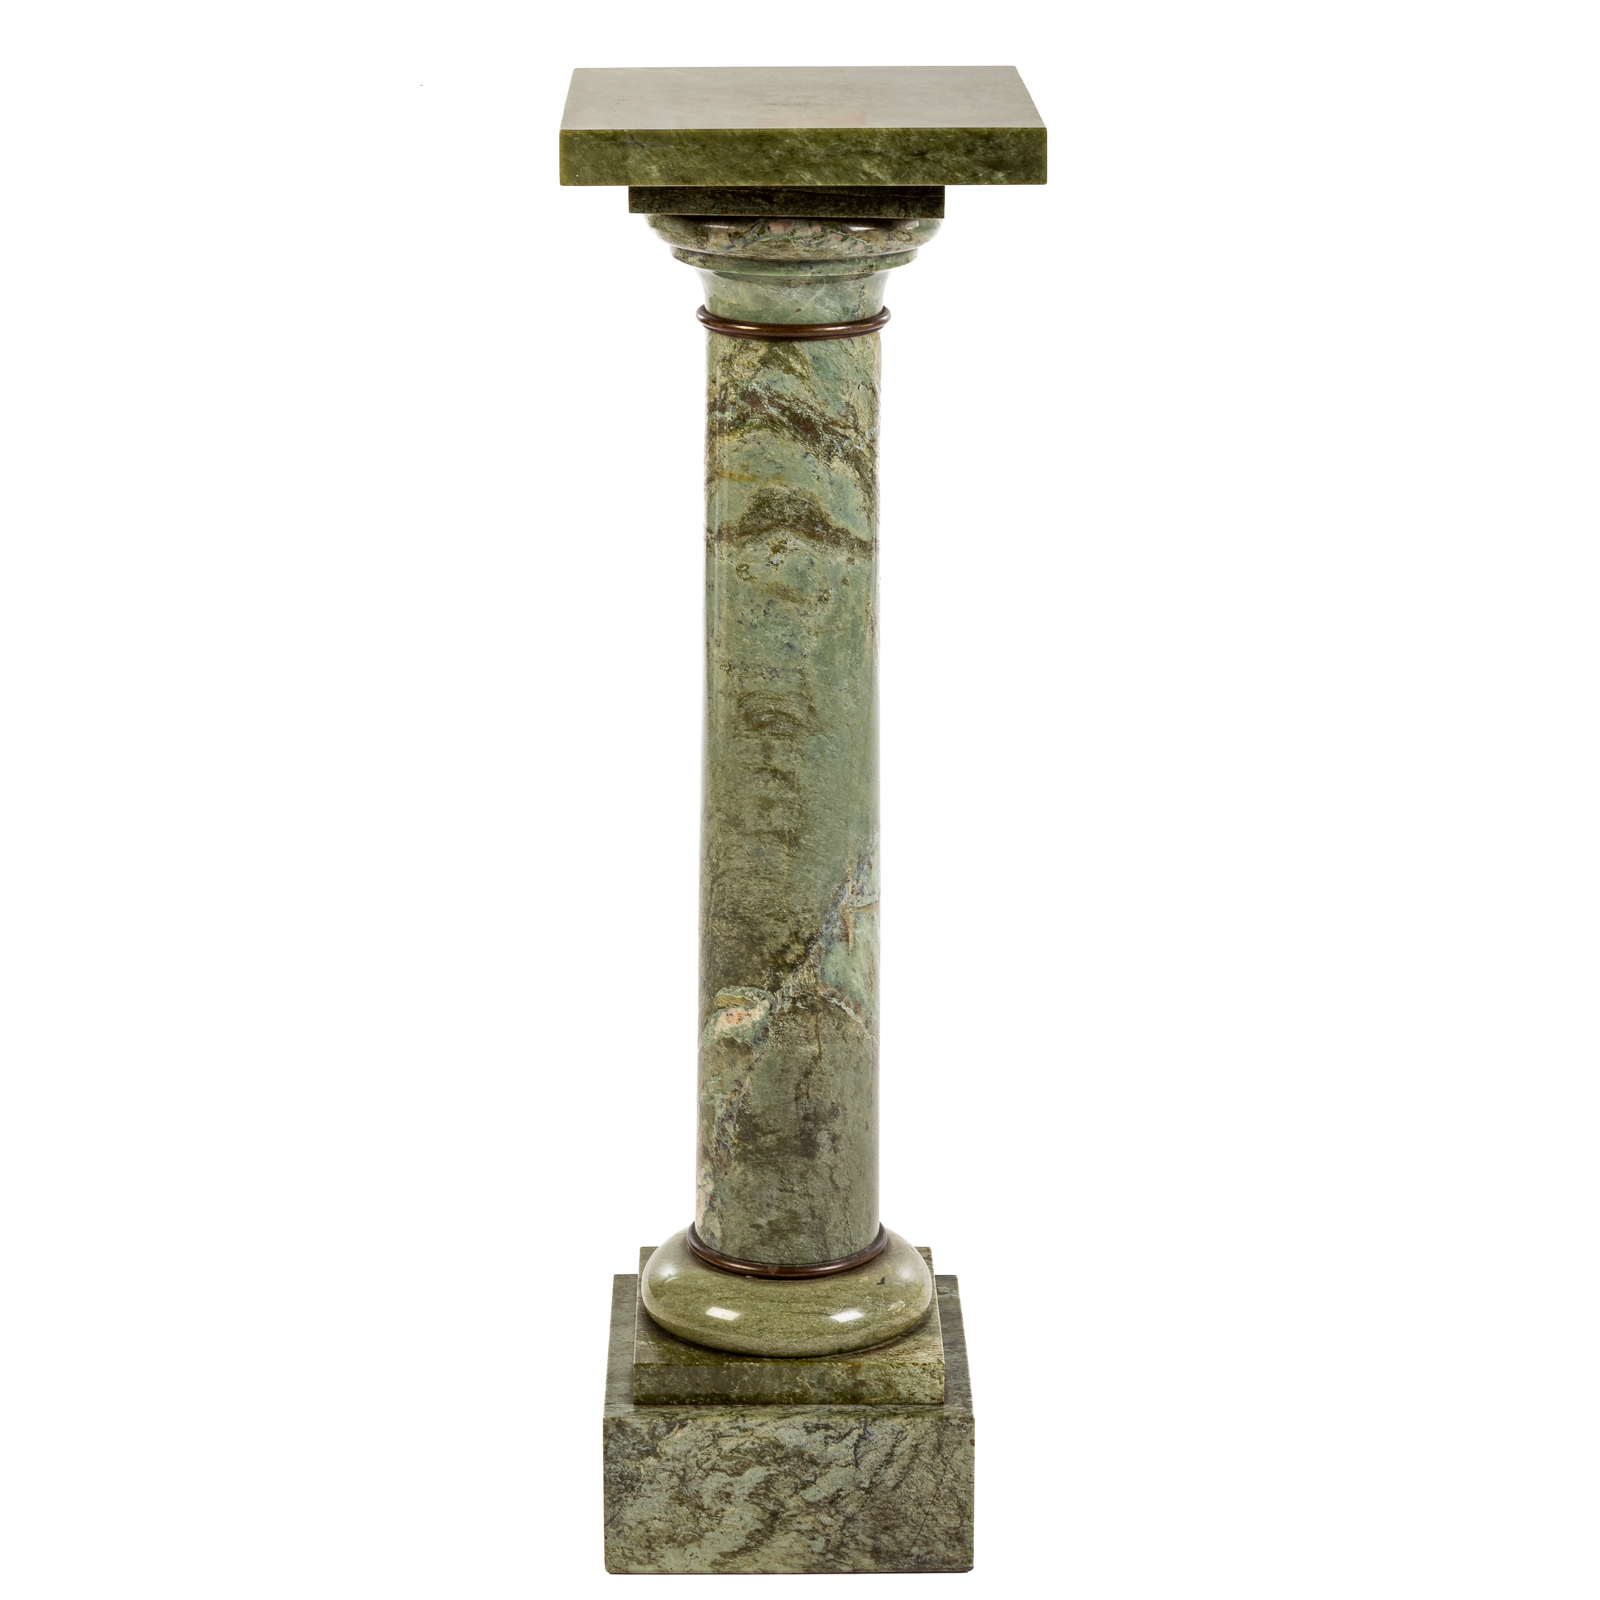 CLASSICAL STYLE ONYX PEDESTAL 20th